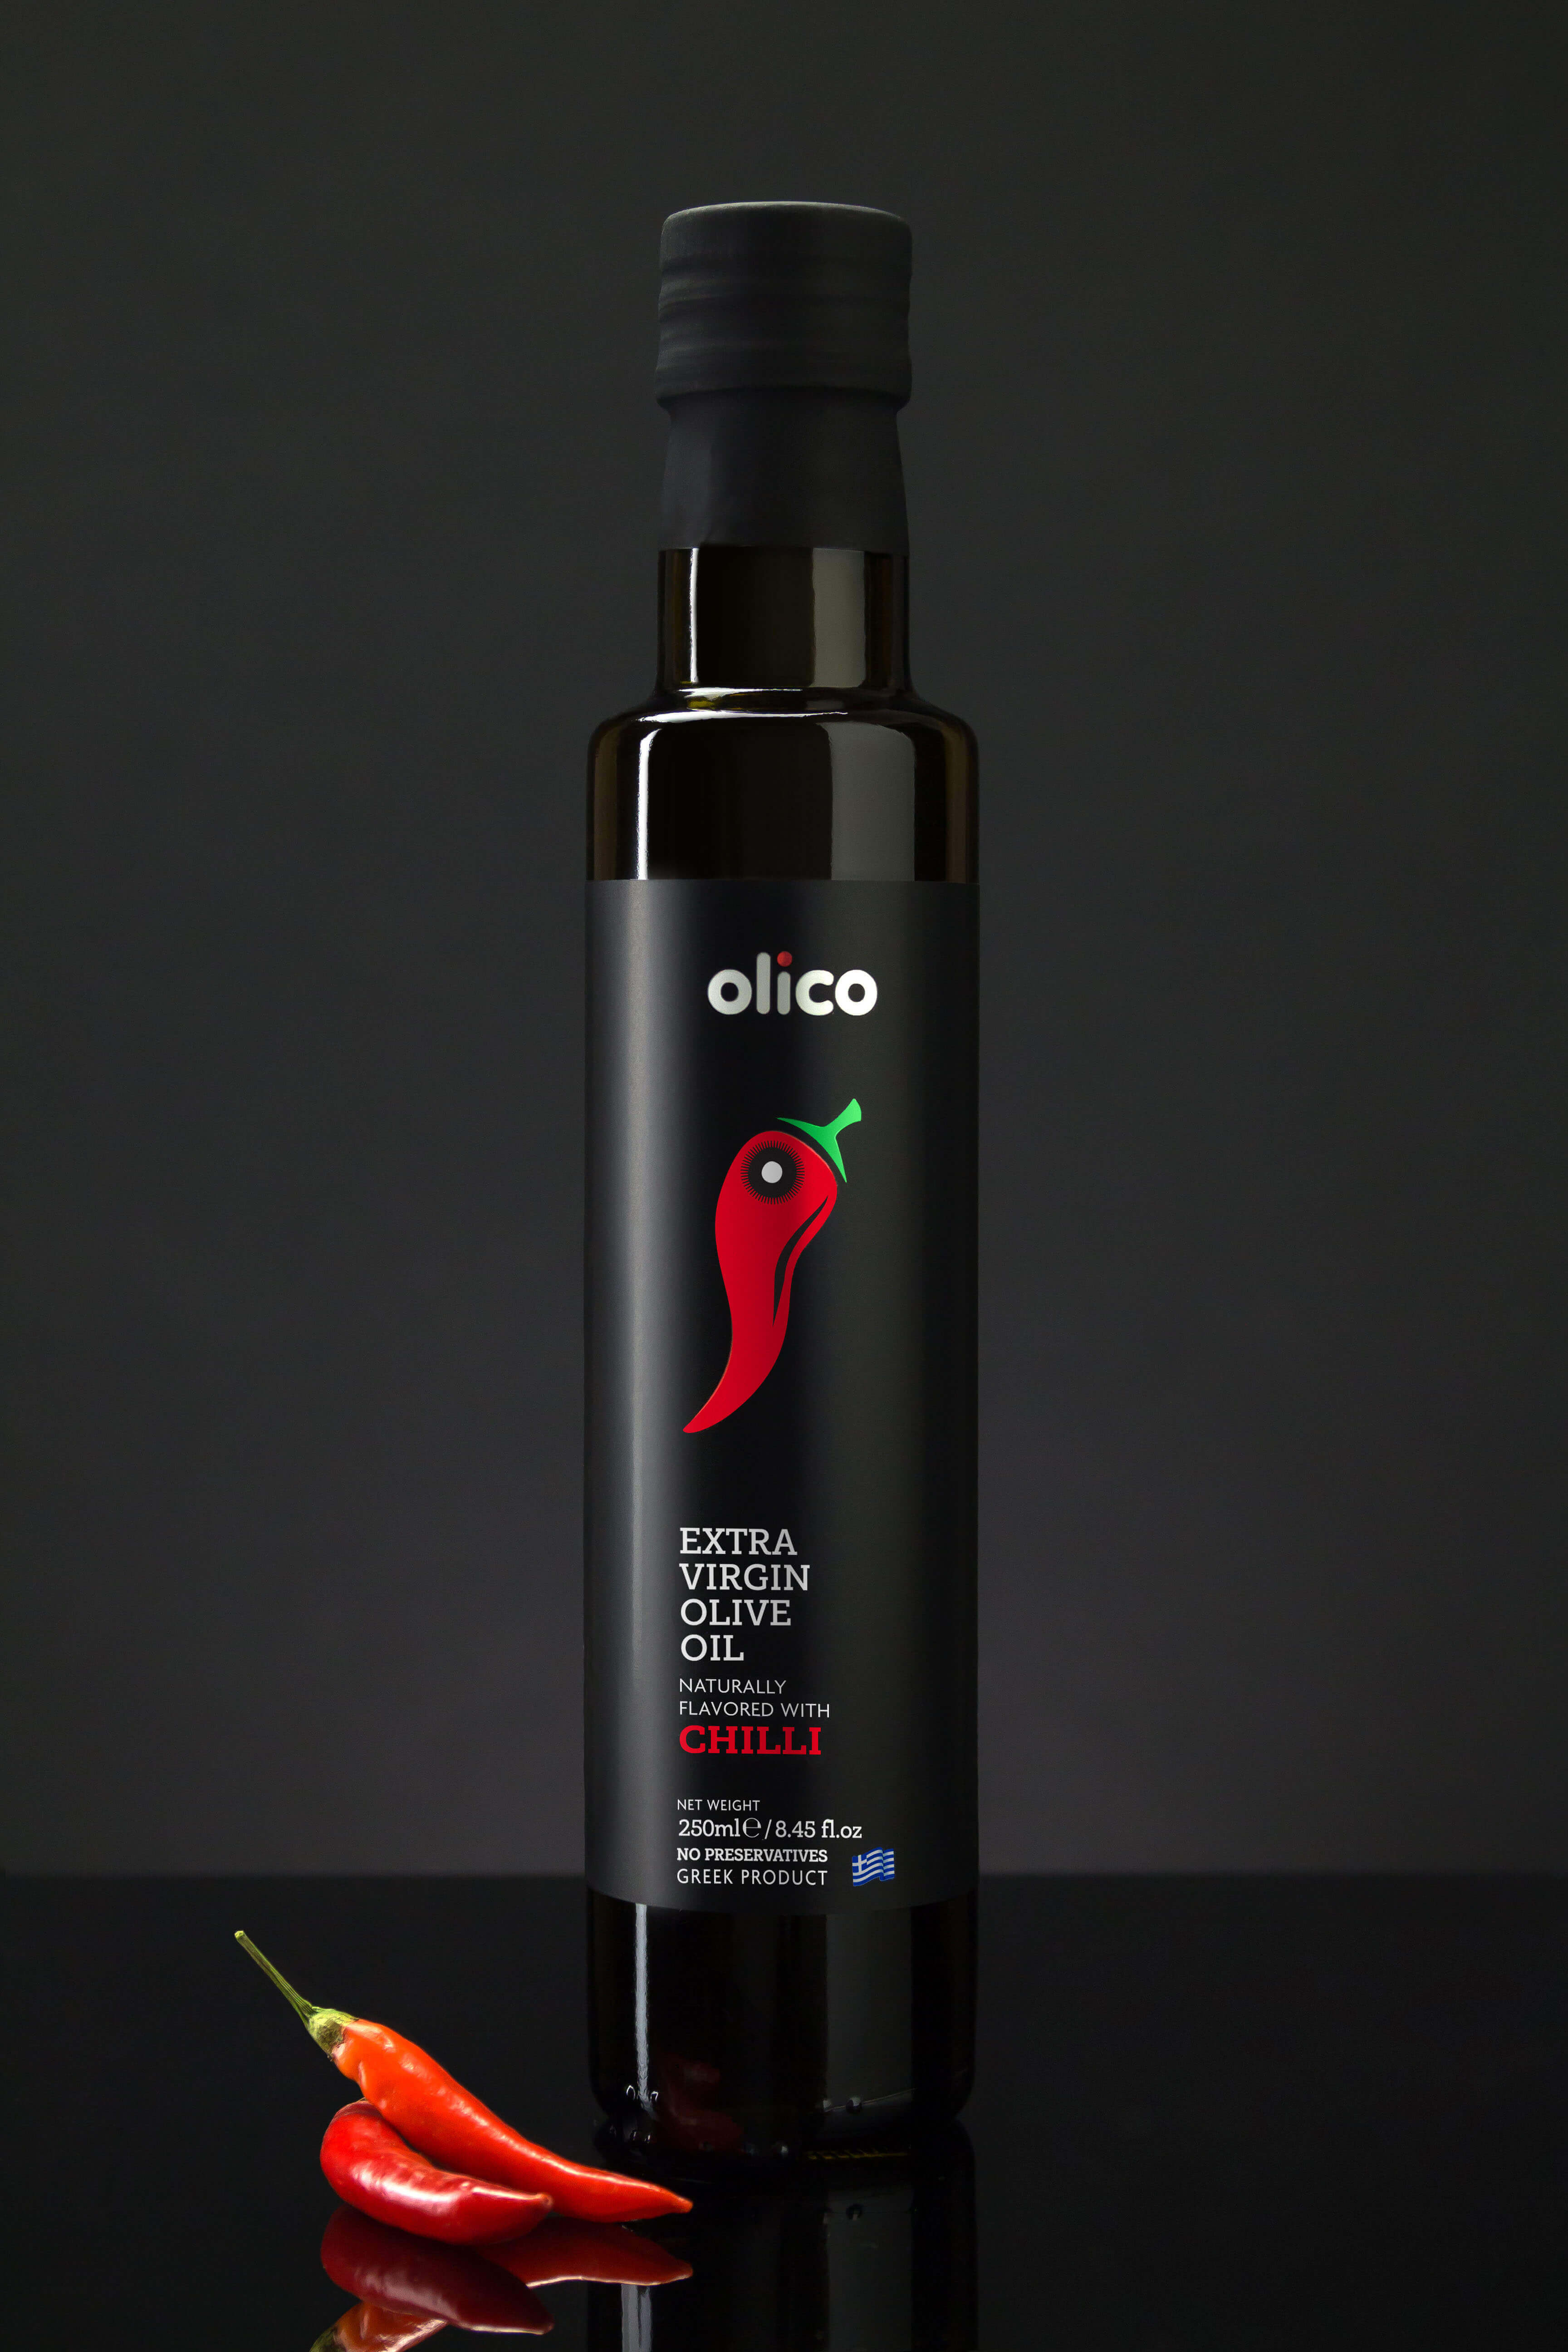 GOURMET EXTRA VIRGIN OLIVE OIL NATURALLY FLAVORED WITH CHILLI